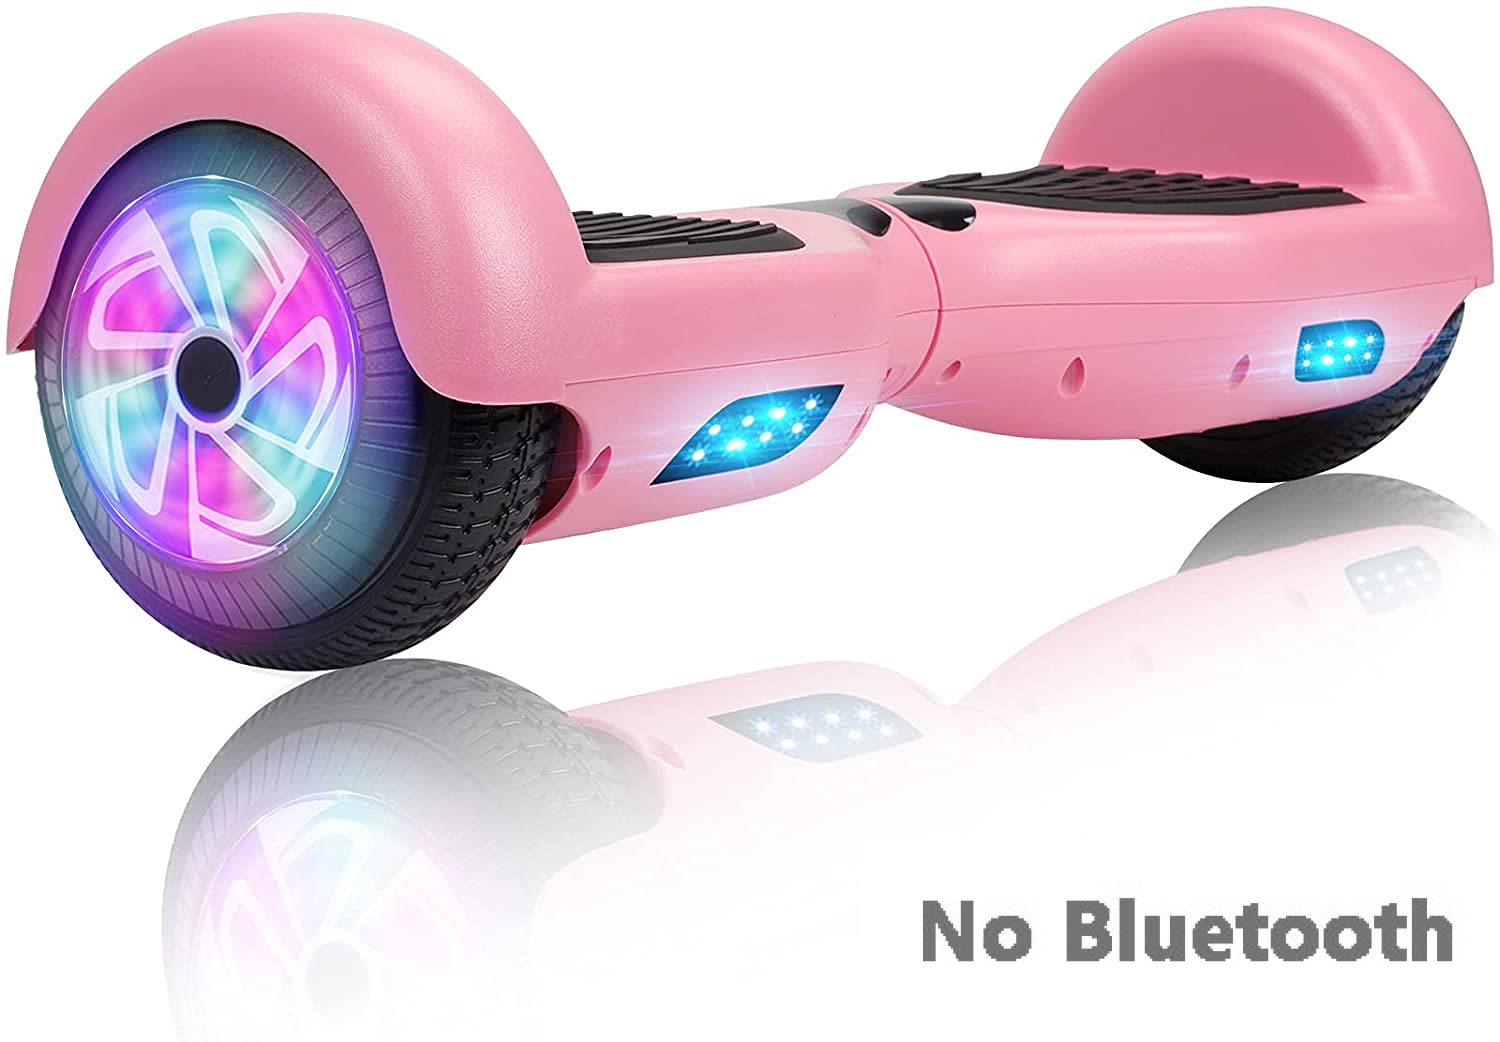 Hoverboard 6.5" Self Balancing Board LED Light Electric Scooters Hoverkart 